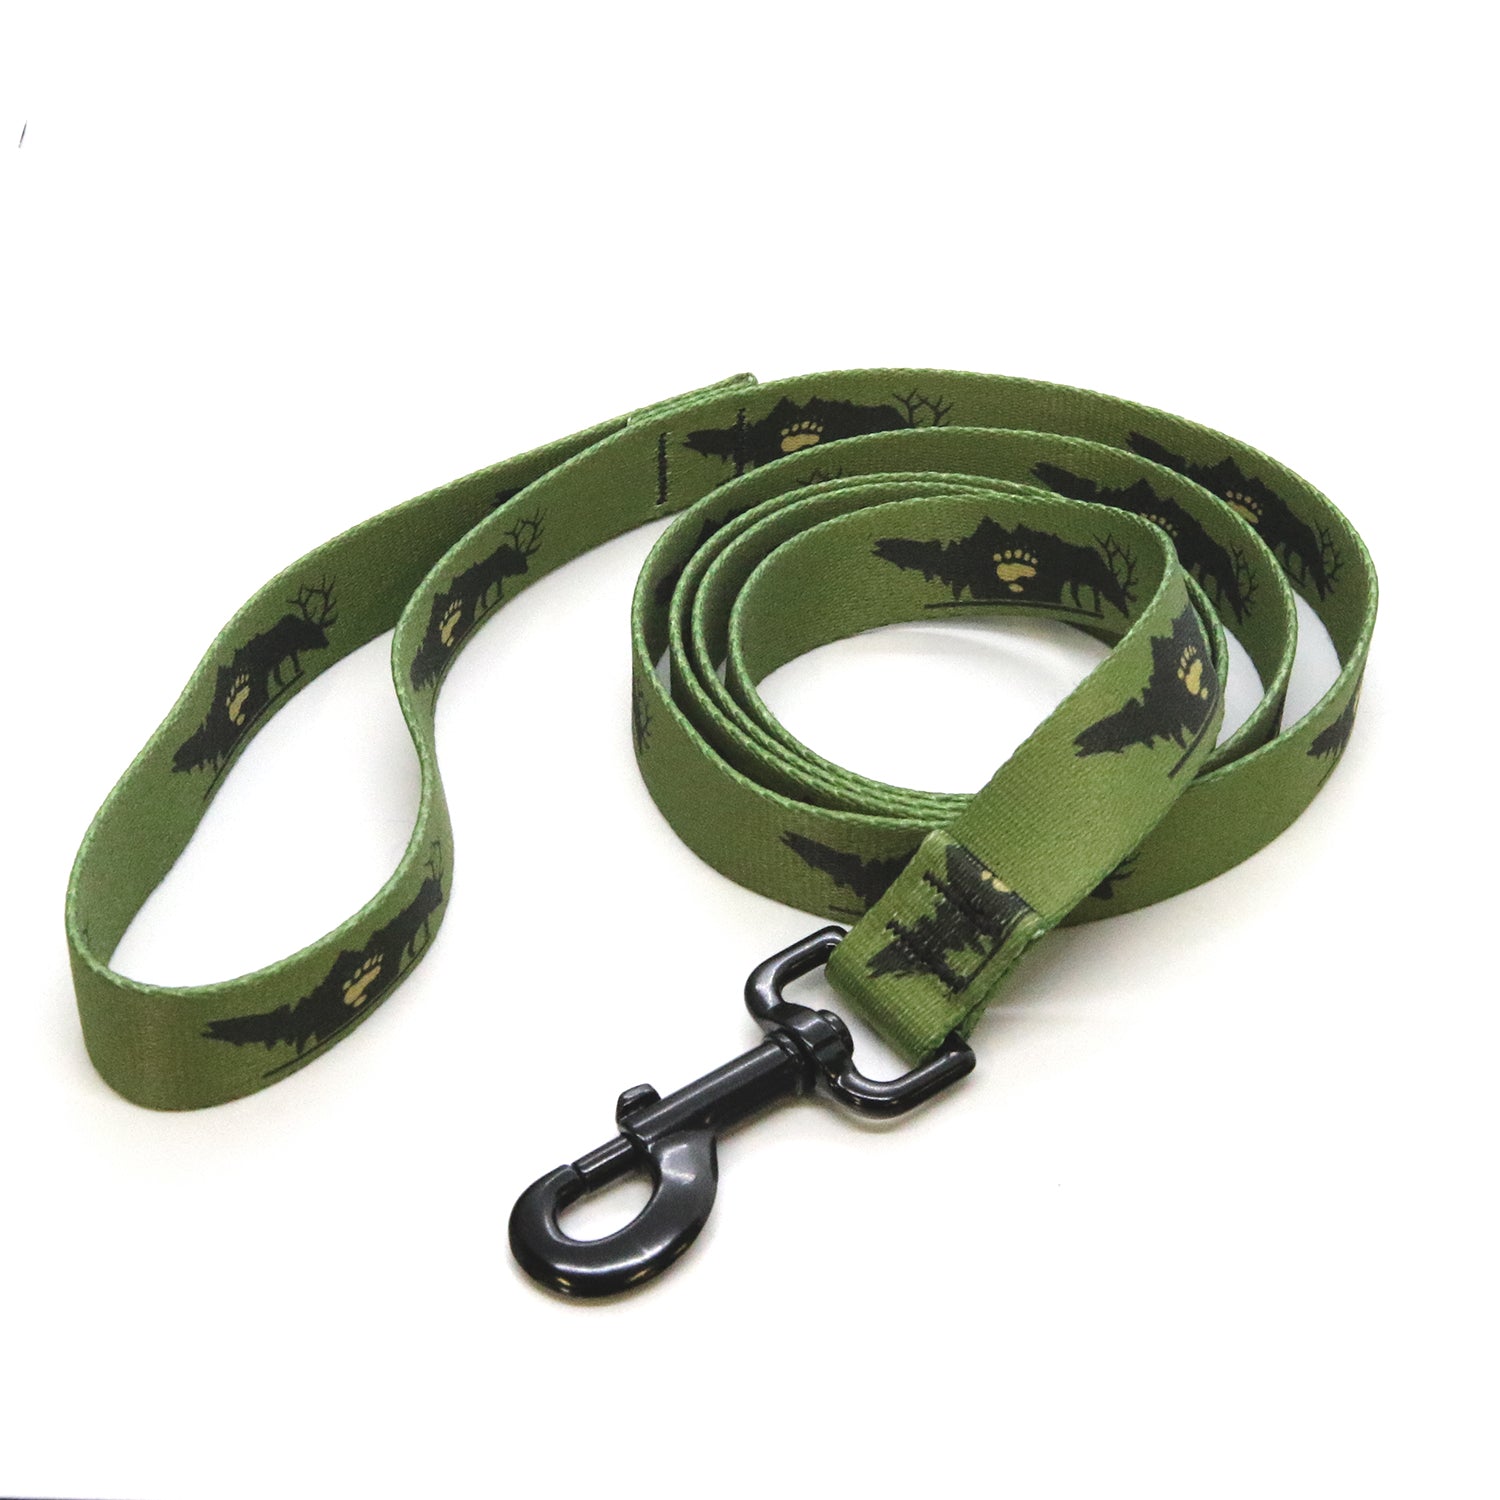 A green dog leash with a design of a trout bear paw and elk is shown